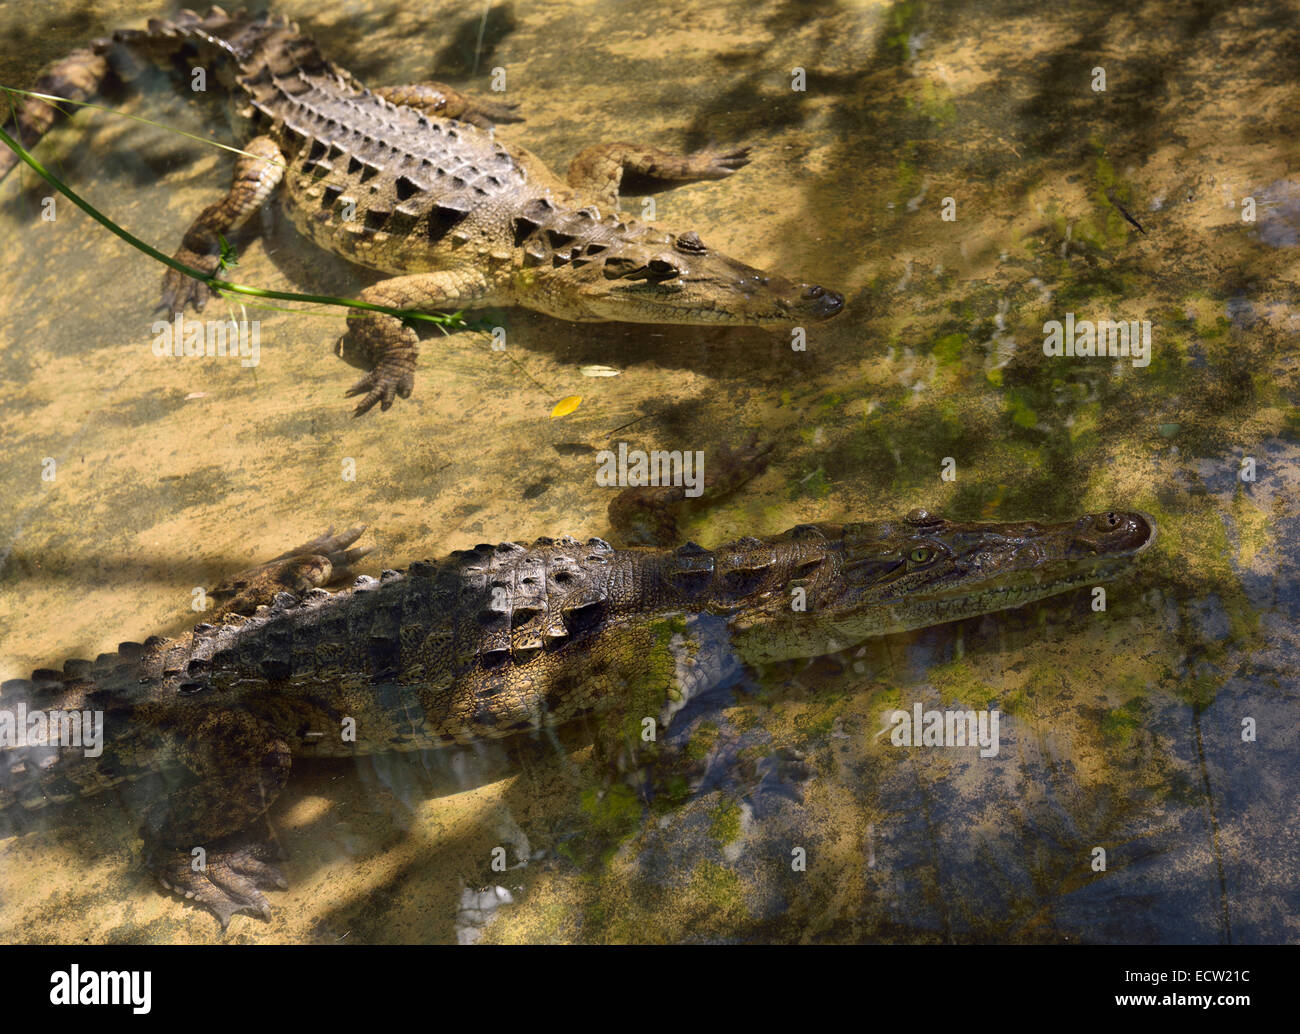 Pair of young American Crocodiles wading in a shallow pool Dominican Republic Stock Photo